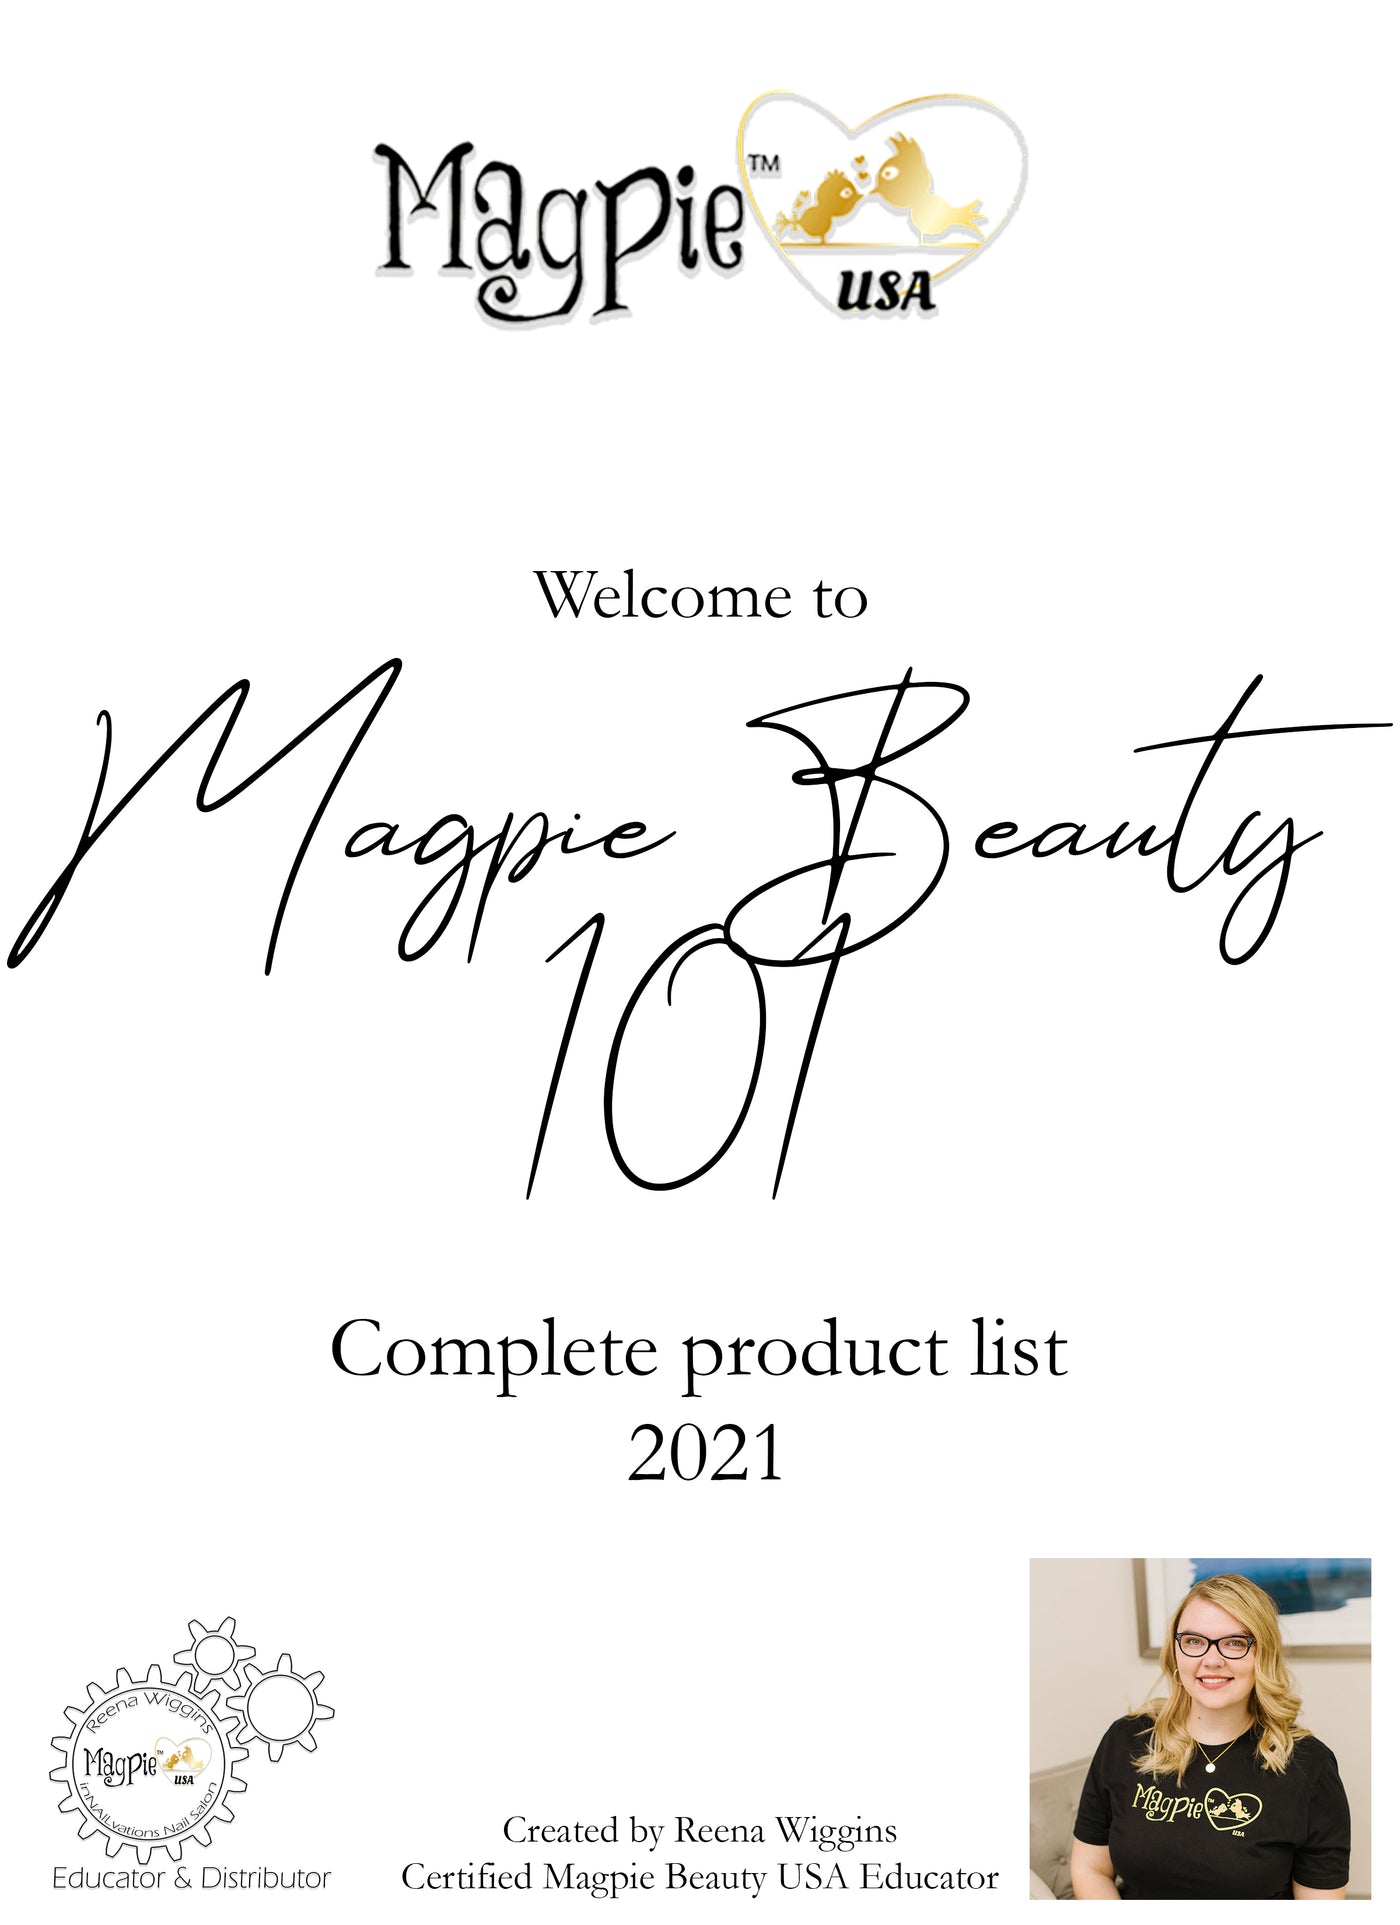 Magpie Product List E-Book - Digital Download